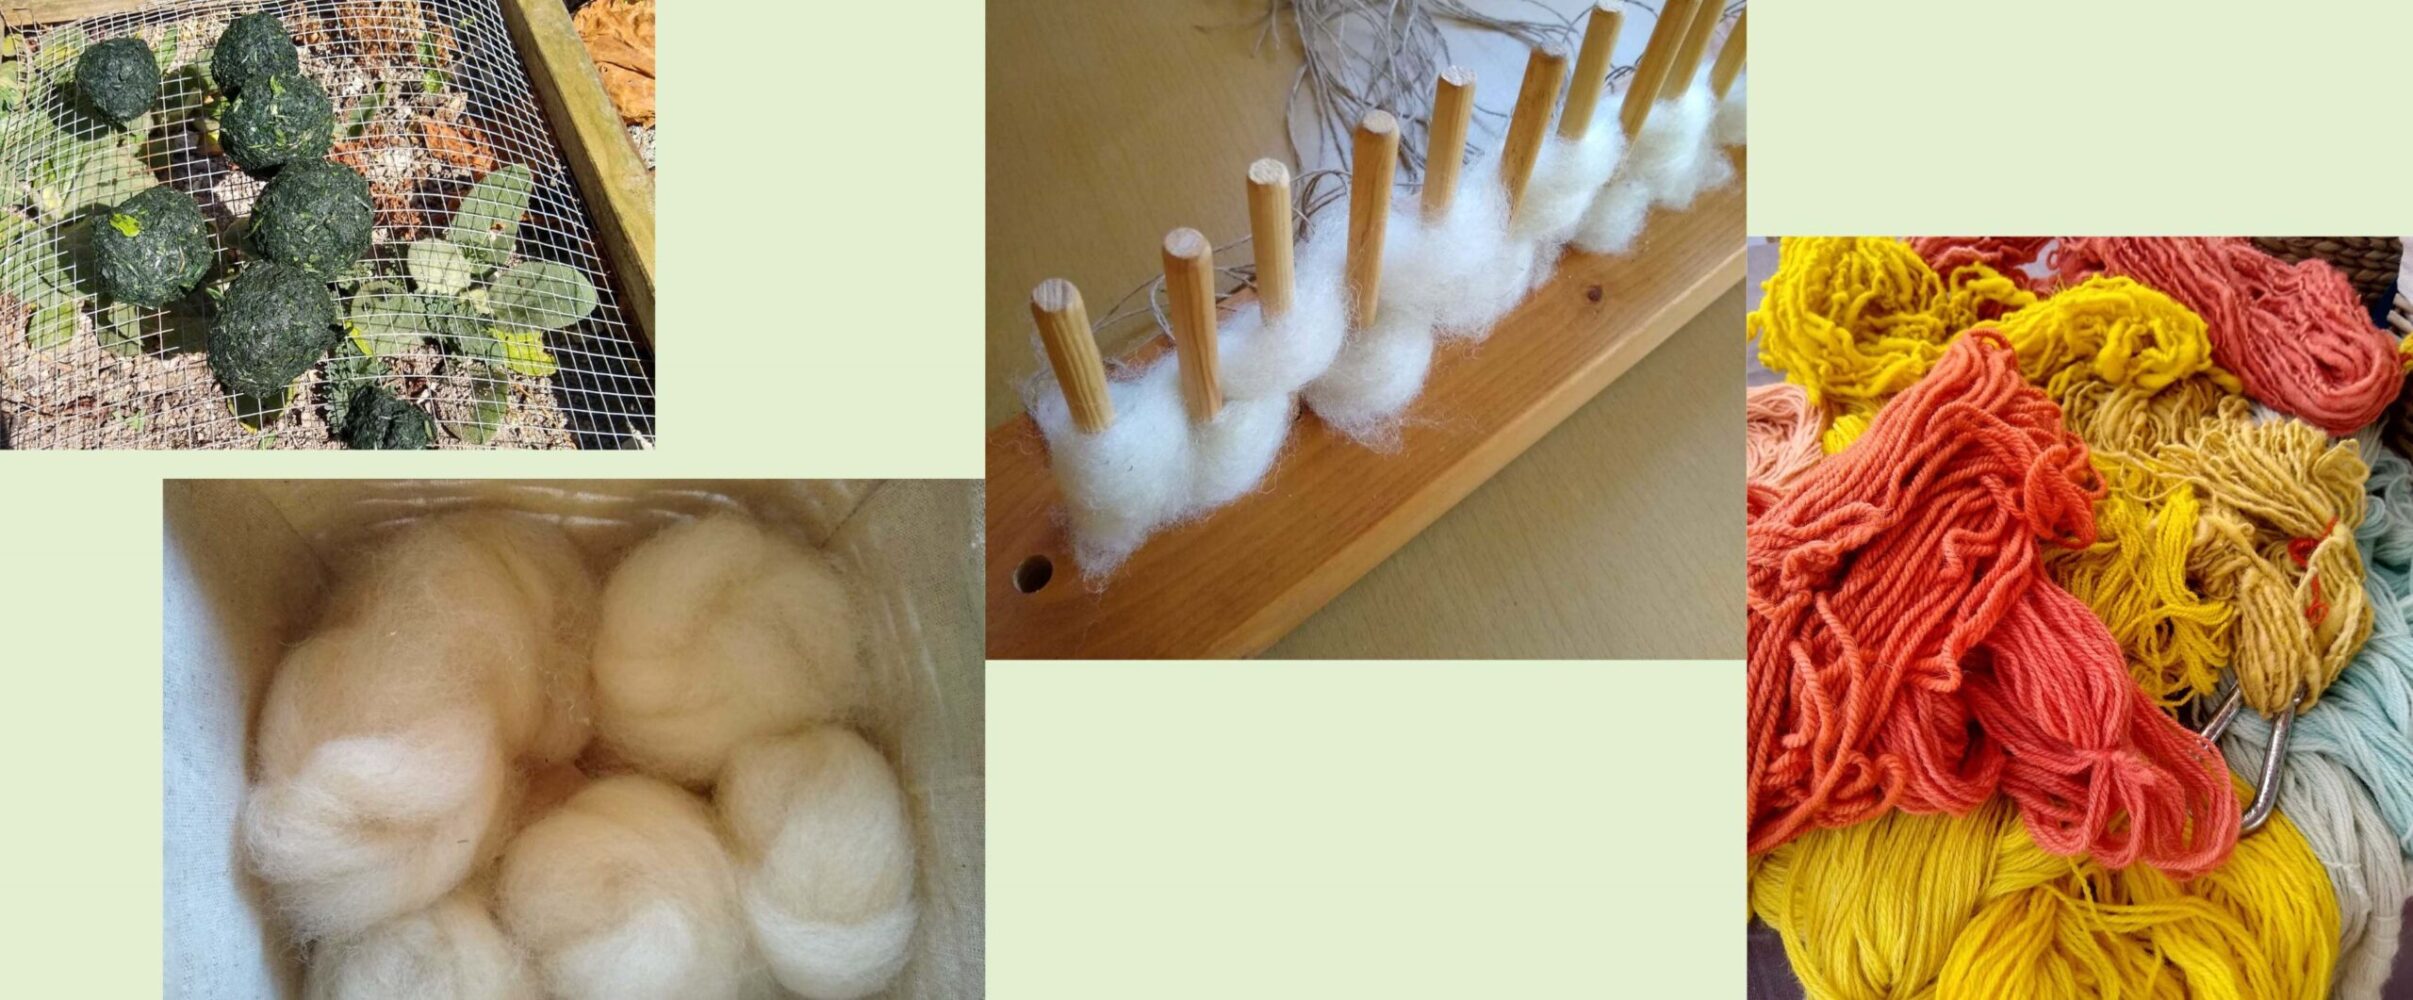 woad balls on a drying rack. combed nests of fibre in a box, a peg loom and naturally dyed yarn